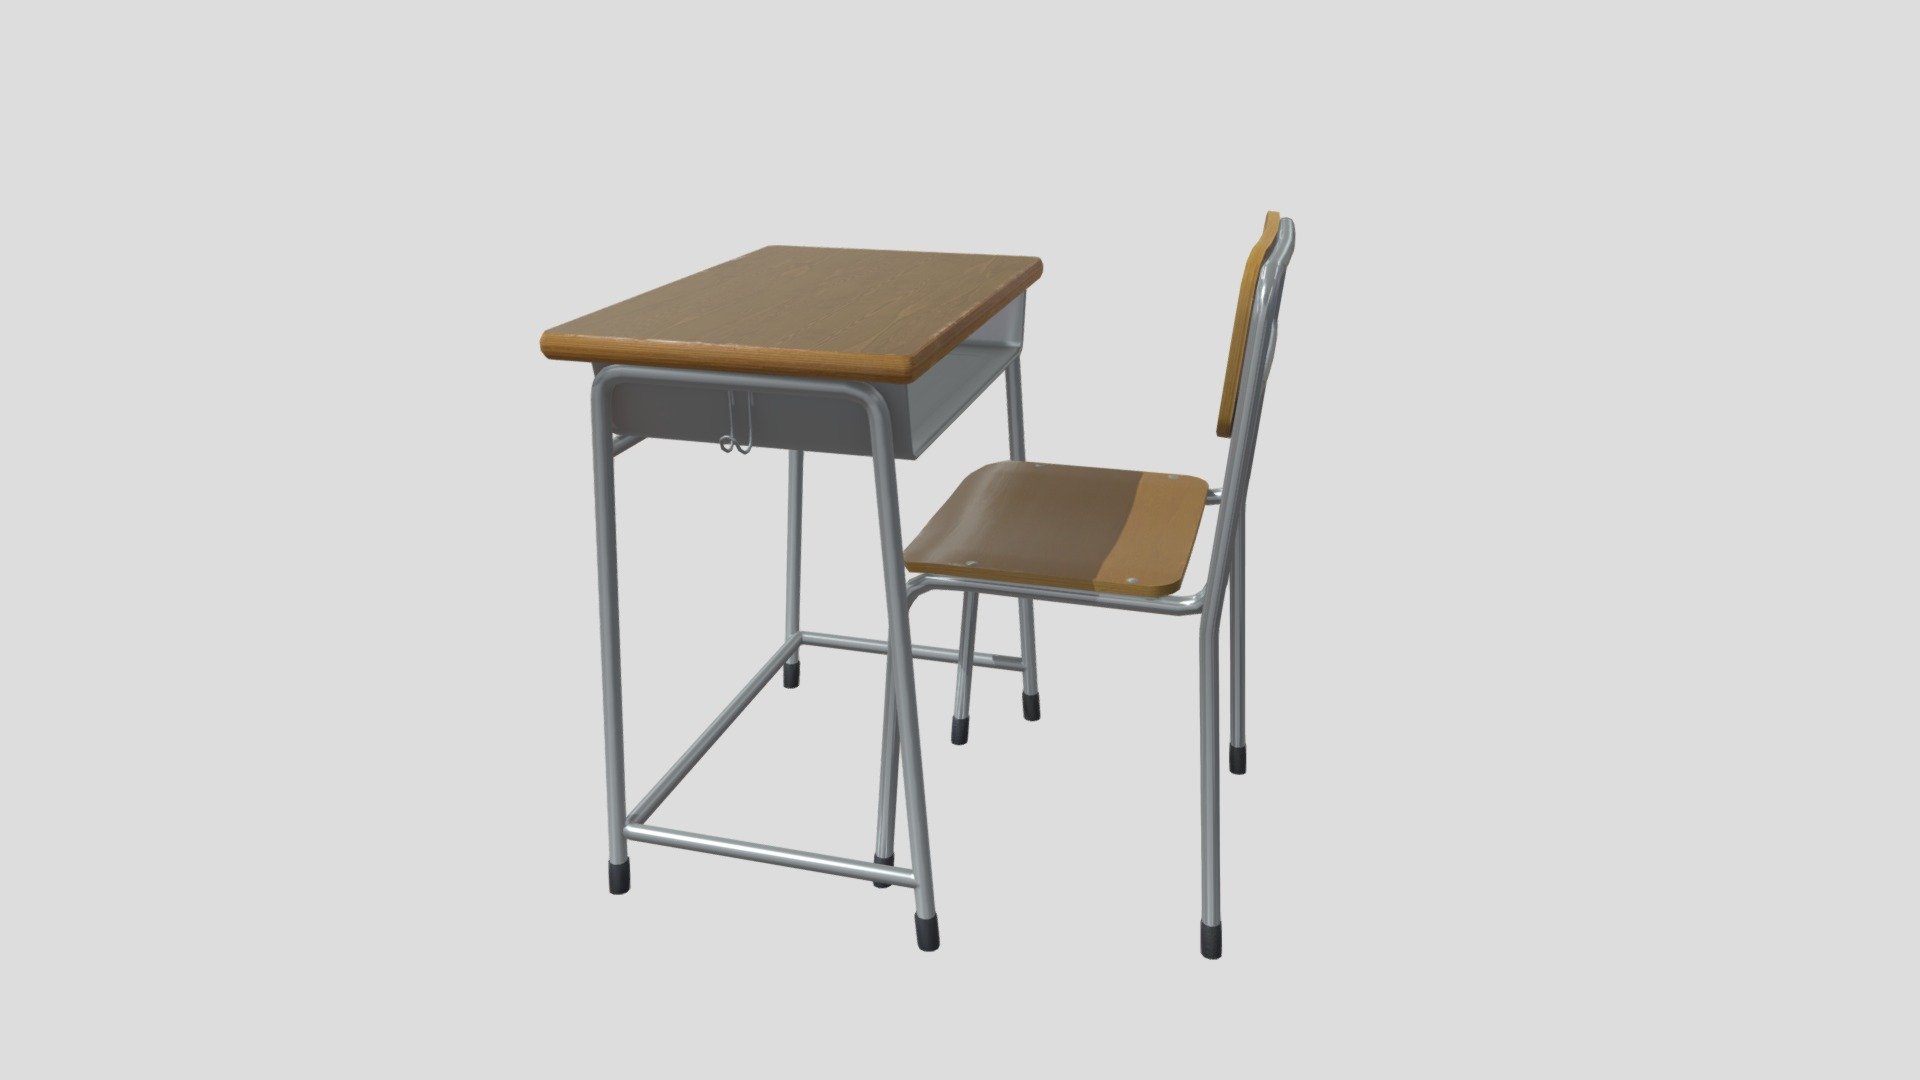 Japanese School Class Desk and Chair Lowpoly models.
Game-ready low poly models.
Use lightwave2020 and Substance painter 3d model